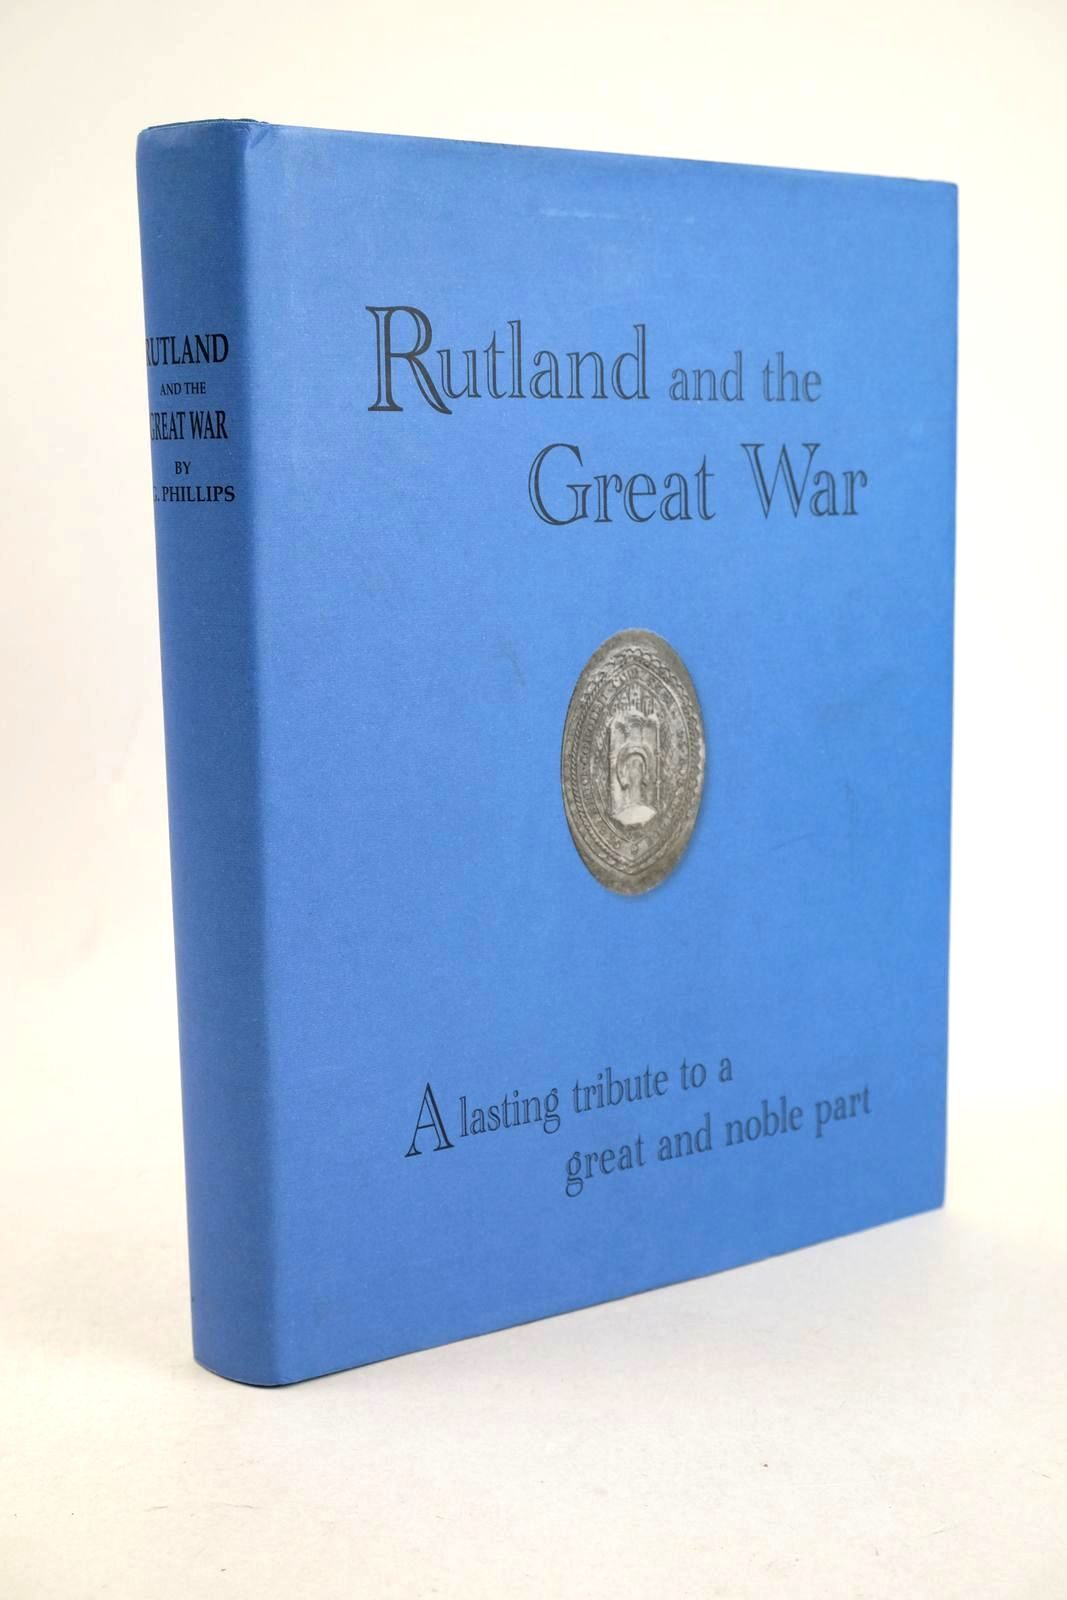 Photo of RUTLAND AND THE GREAT WAR: A LASTING TRIBUTE TO A GREAT AND NOBLE PART written by Phillips, G. published by Rutland County Museum (STOCK CODE: 1327277)  for sale by Stella & Rose's Books